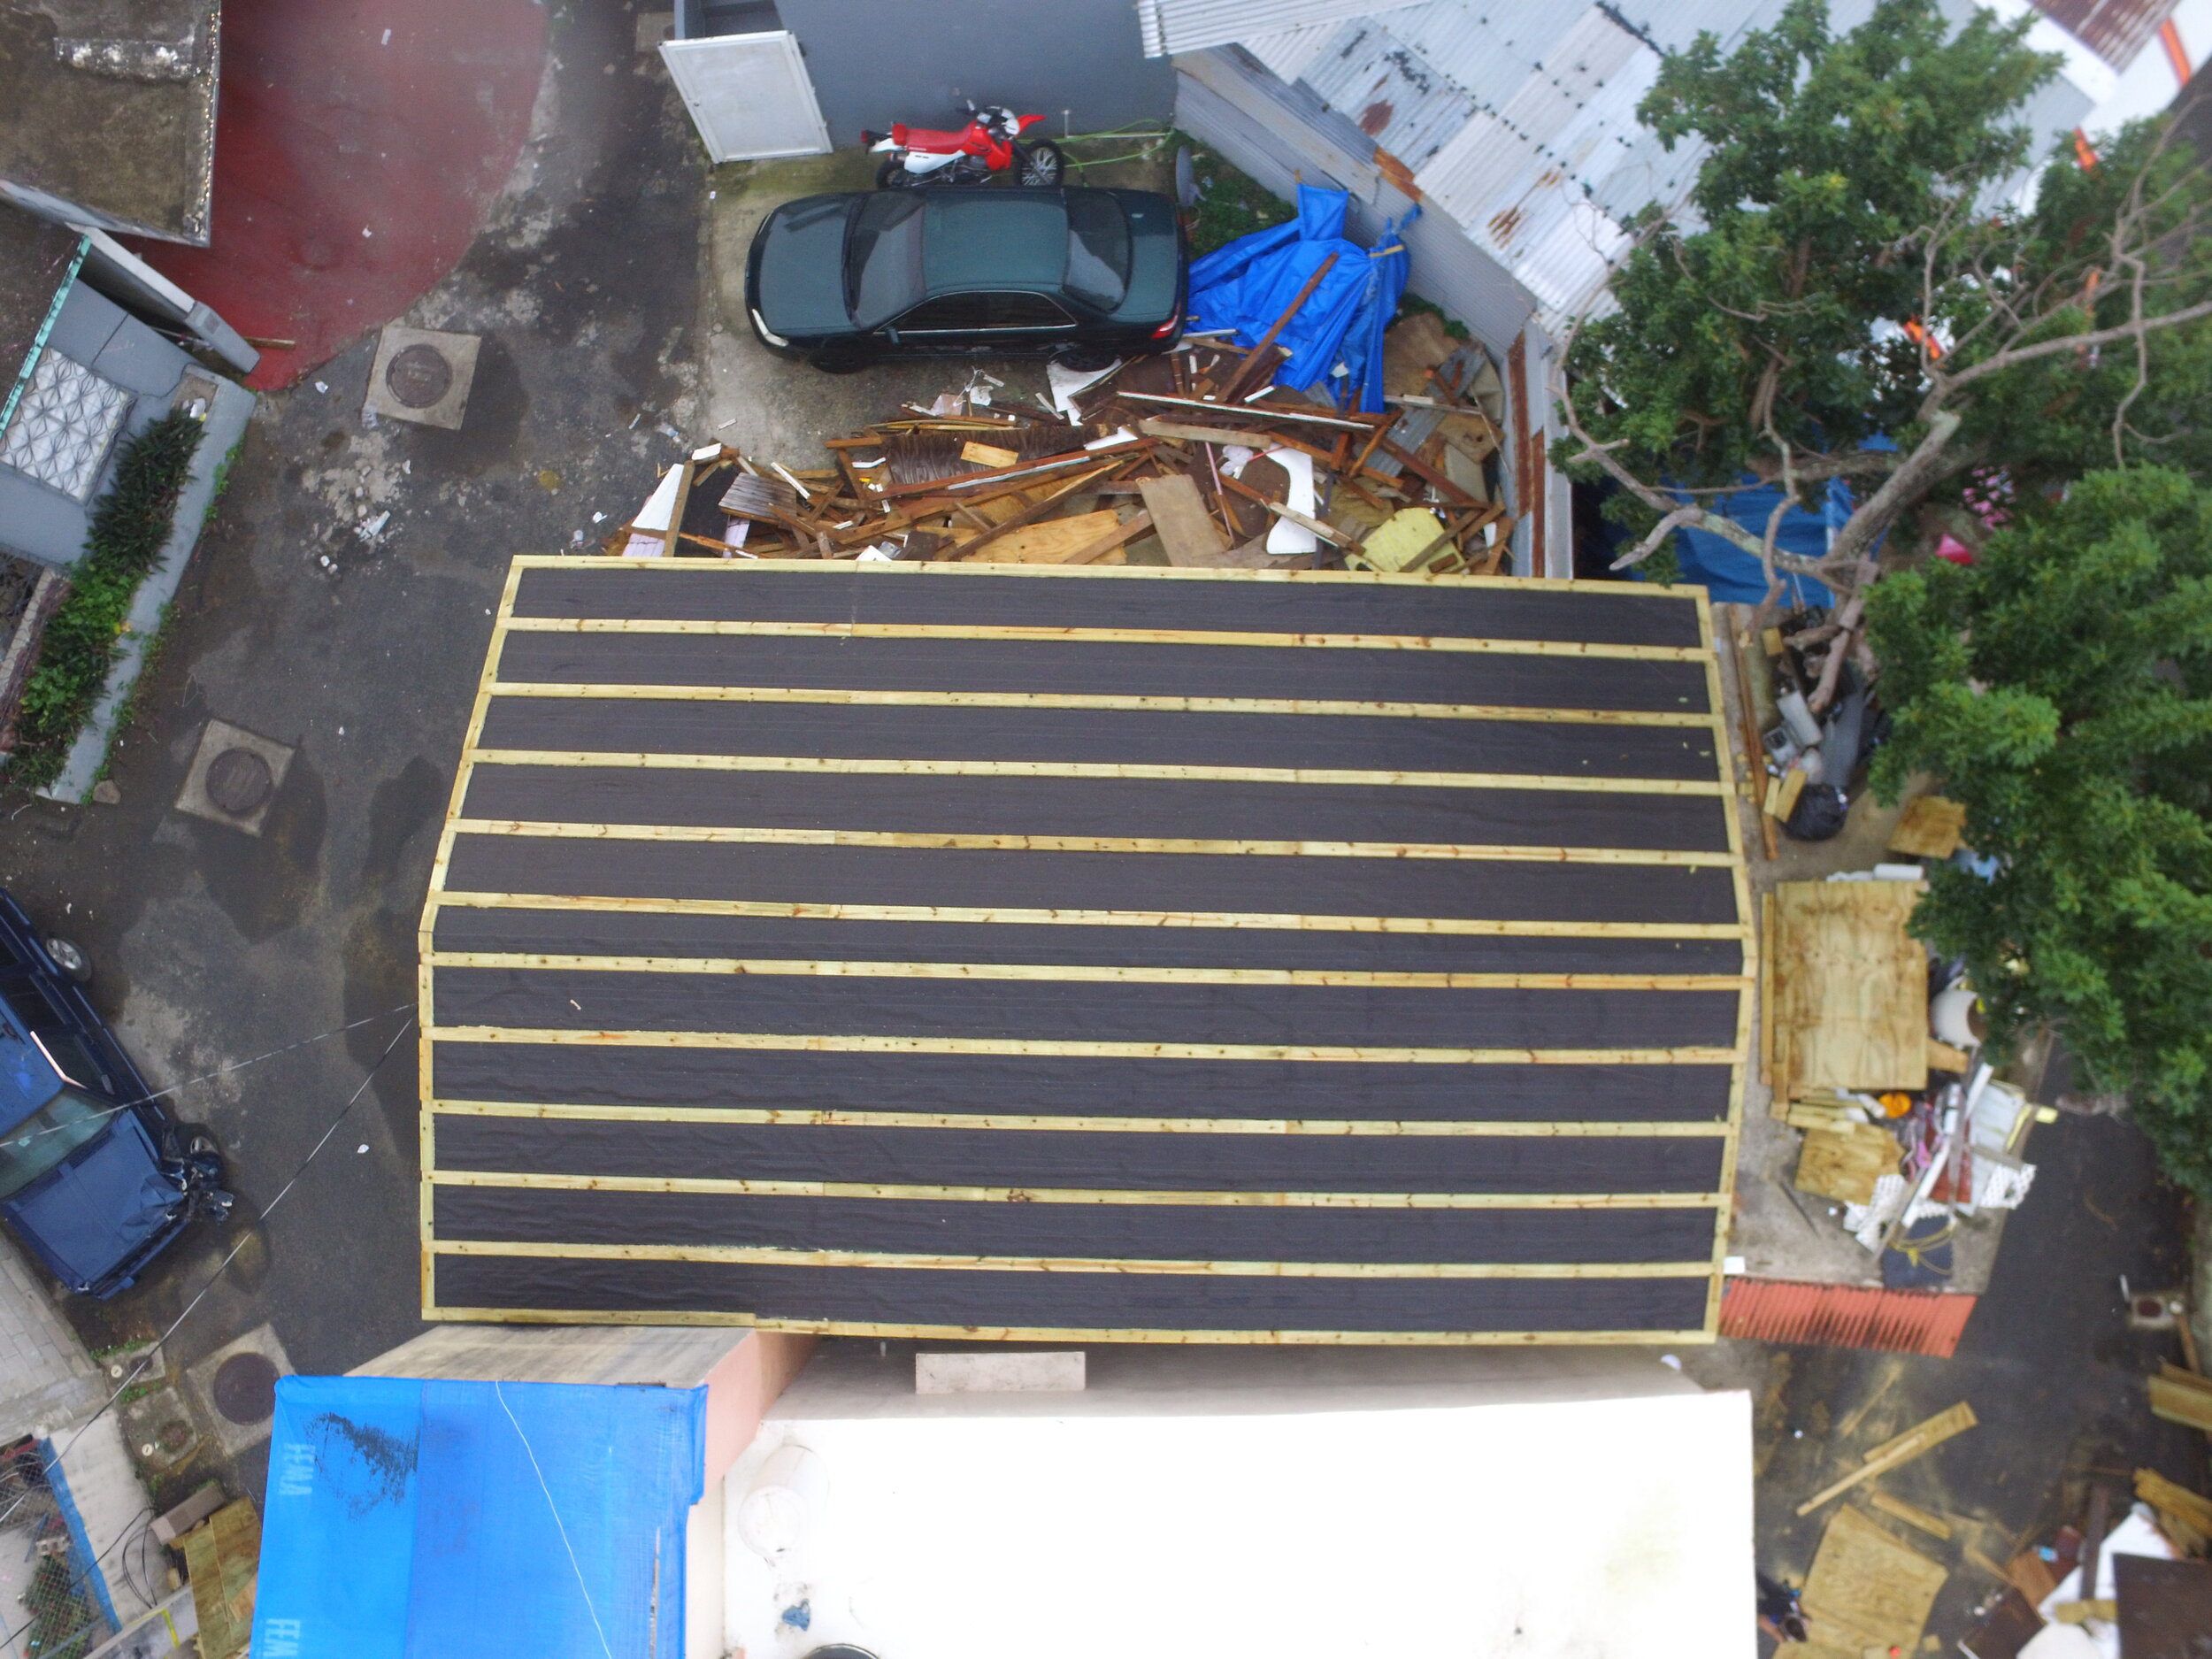  Drone view of the second house after the furring was secured on top of the insulation felt. Photo by Luisel Zayas. 